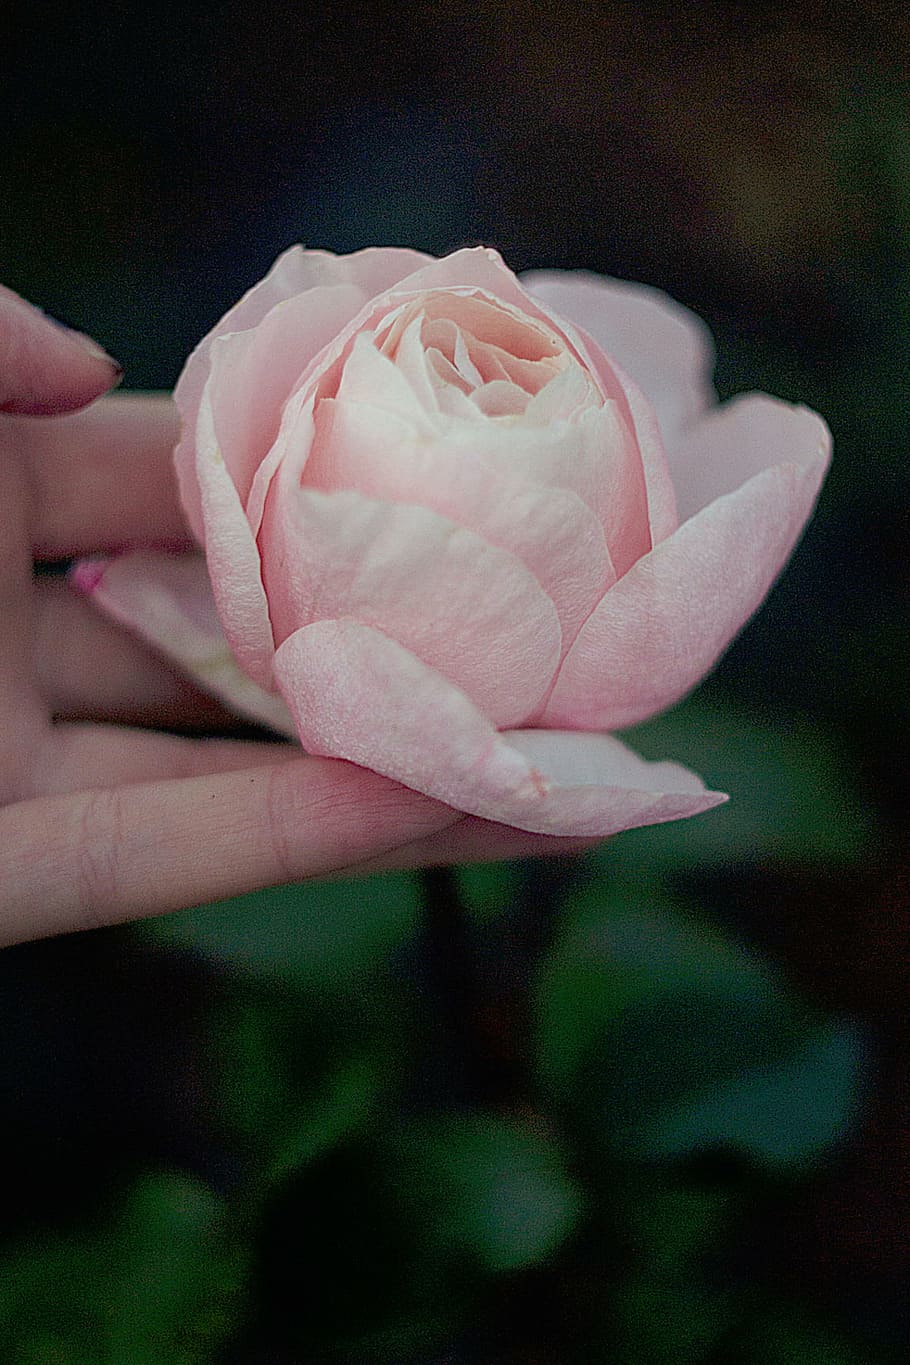 person, holding, pink, rose, bloom, nature, flowers, petals, green, leaves